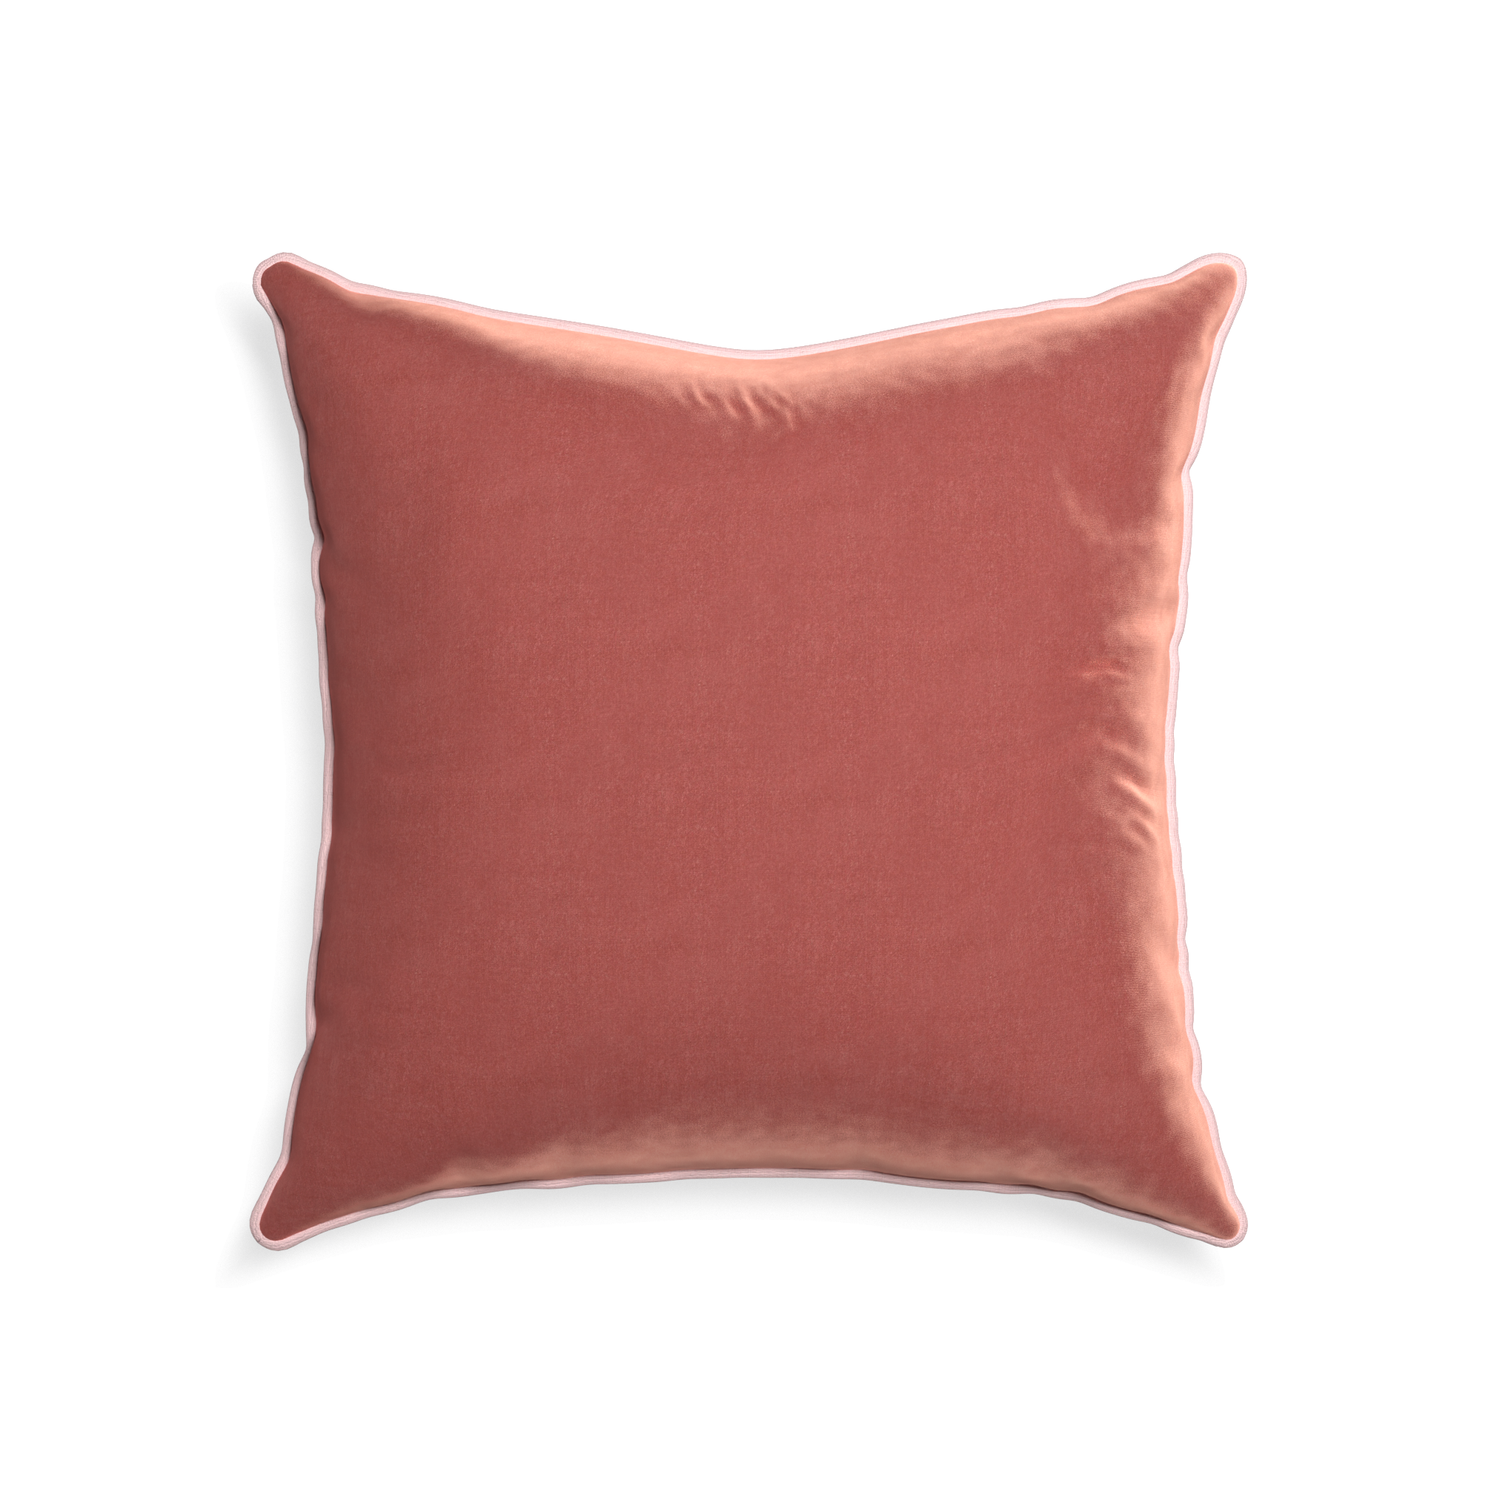 22-square cosmo velvet custom coralpillow with petal piping on white background